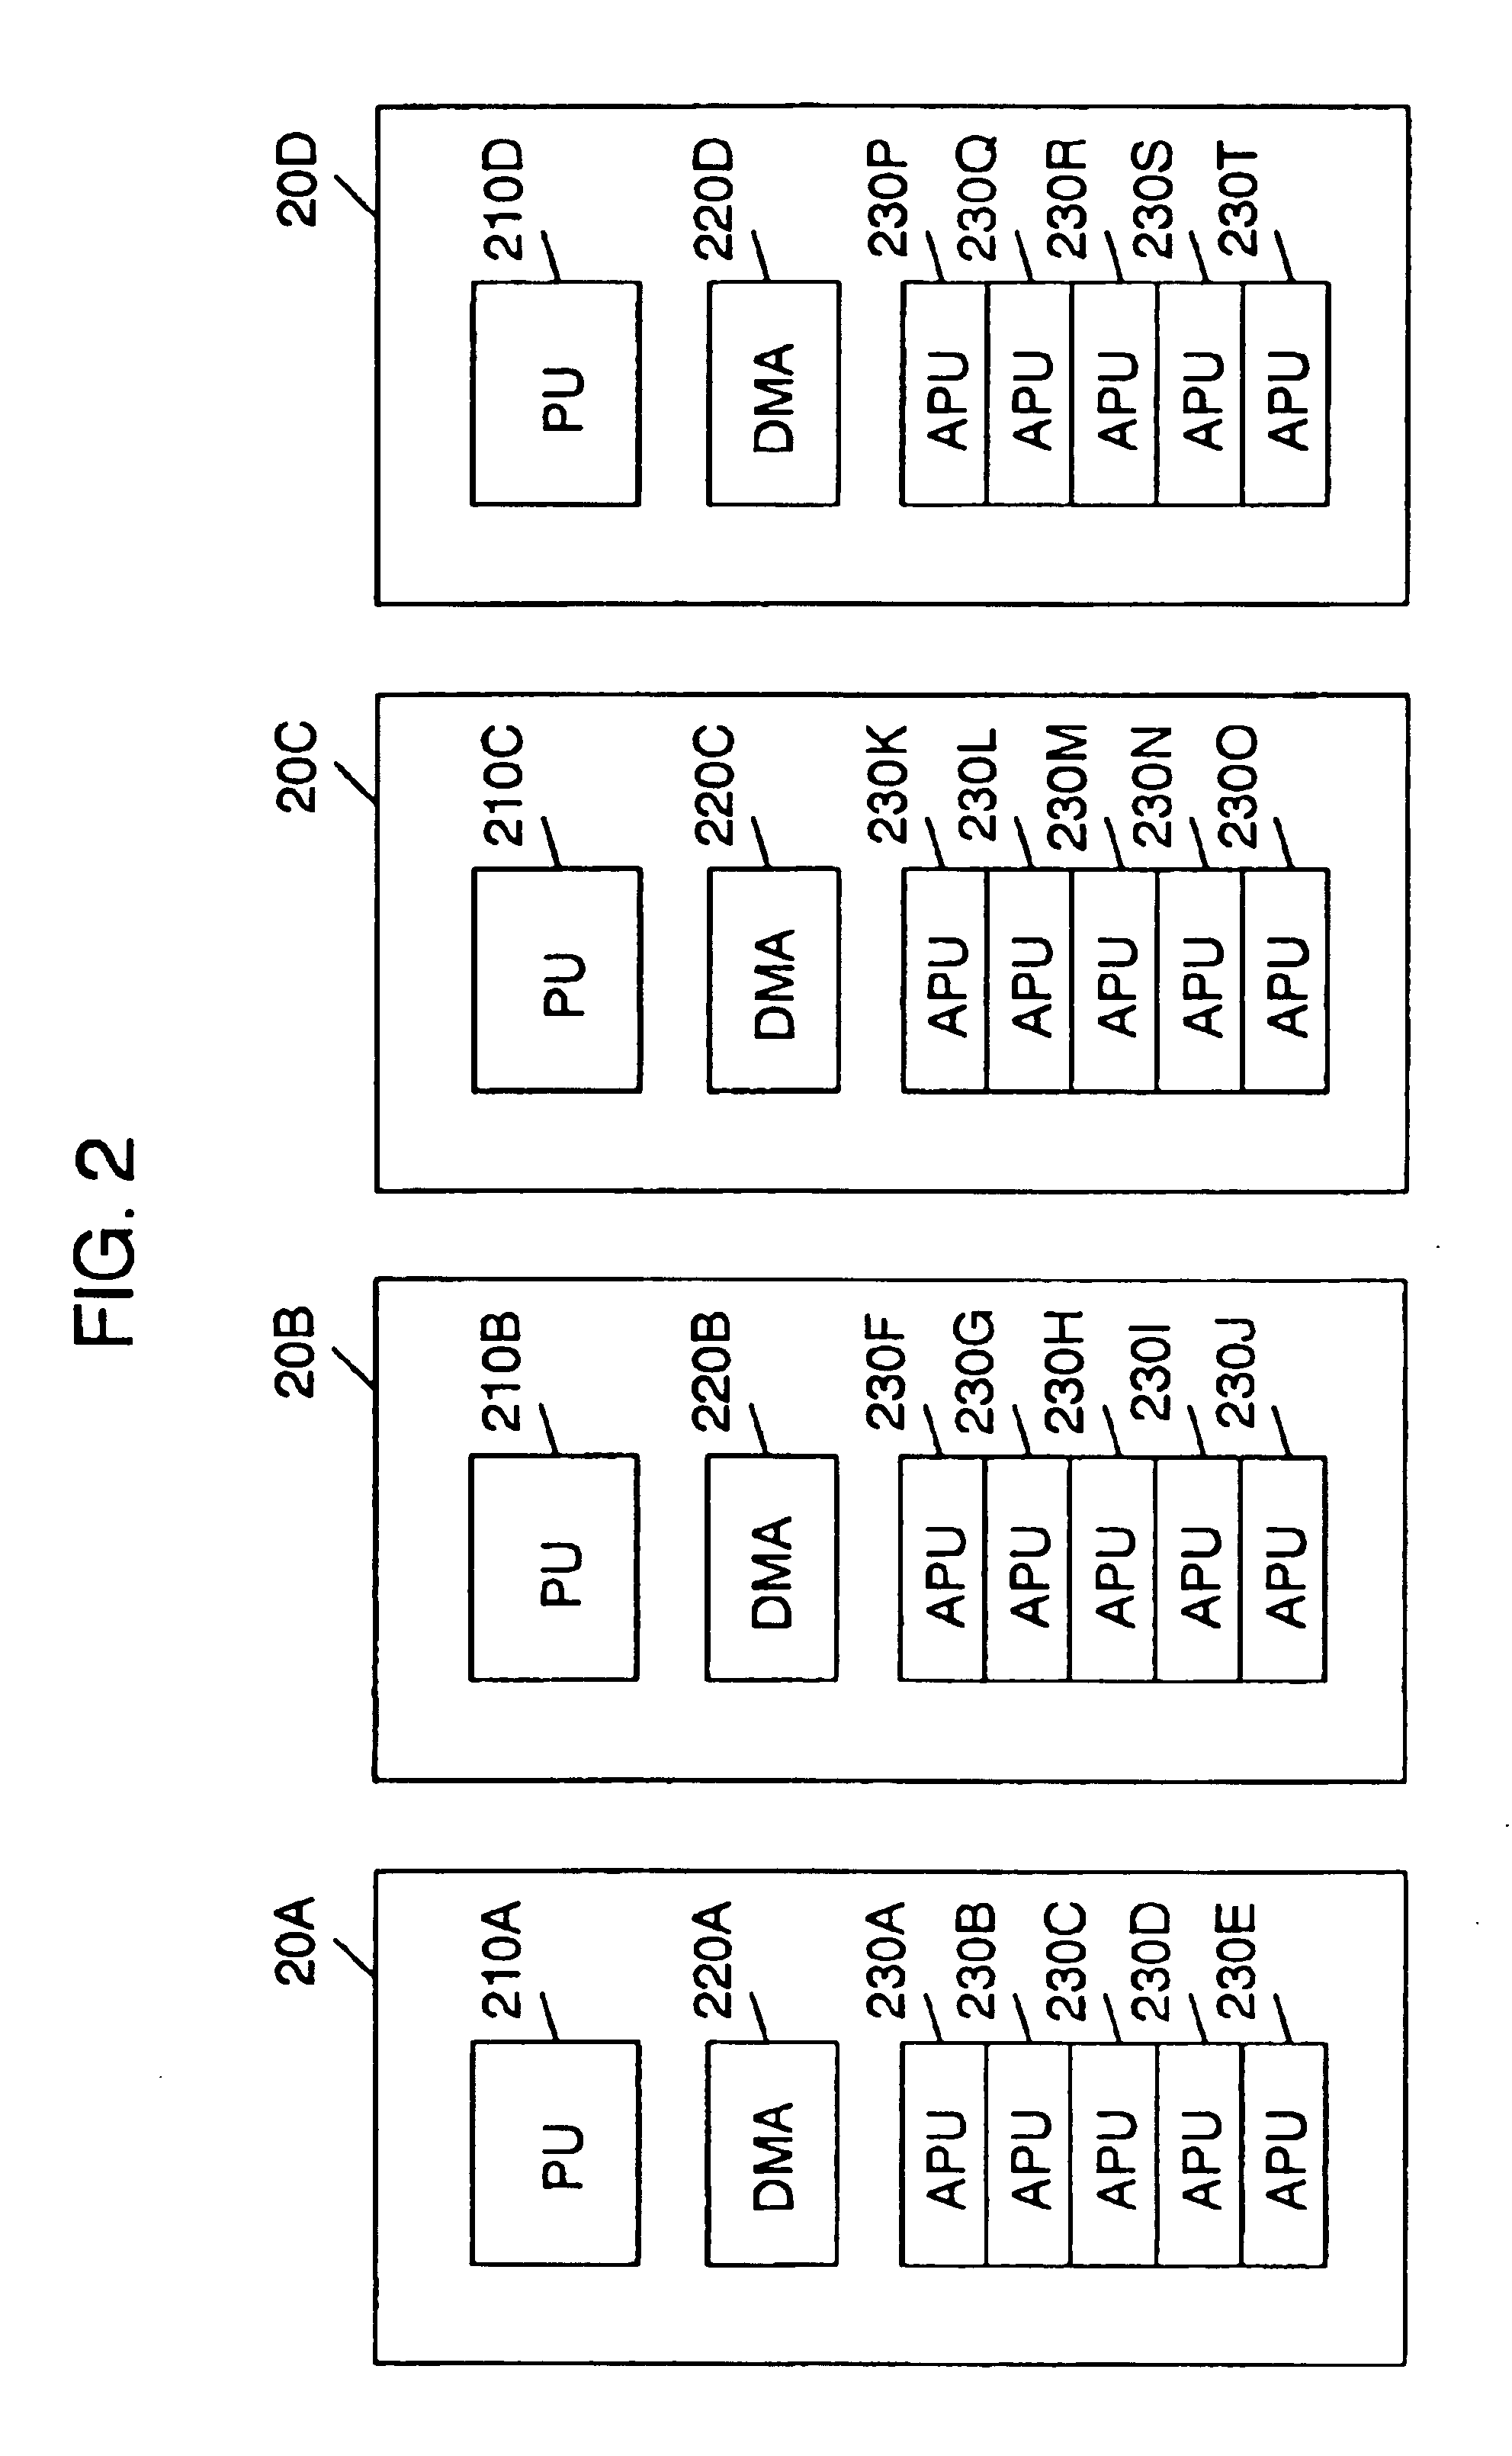 Symmetric multi-processing system utilizing a DMAC to allow address translation for attached processors